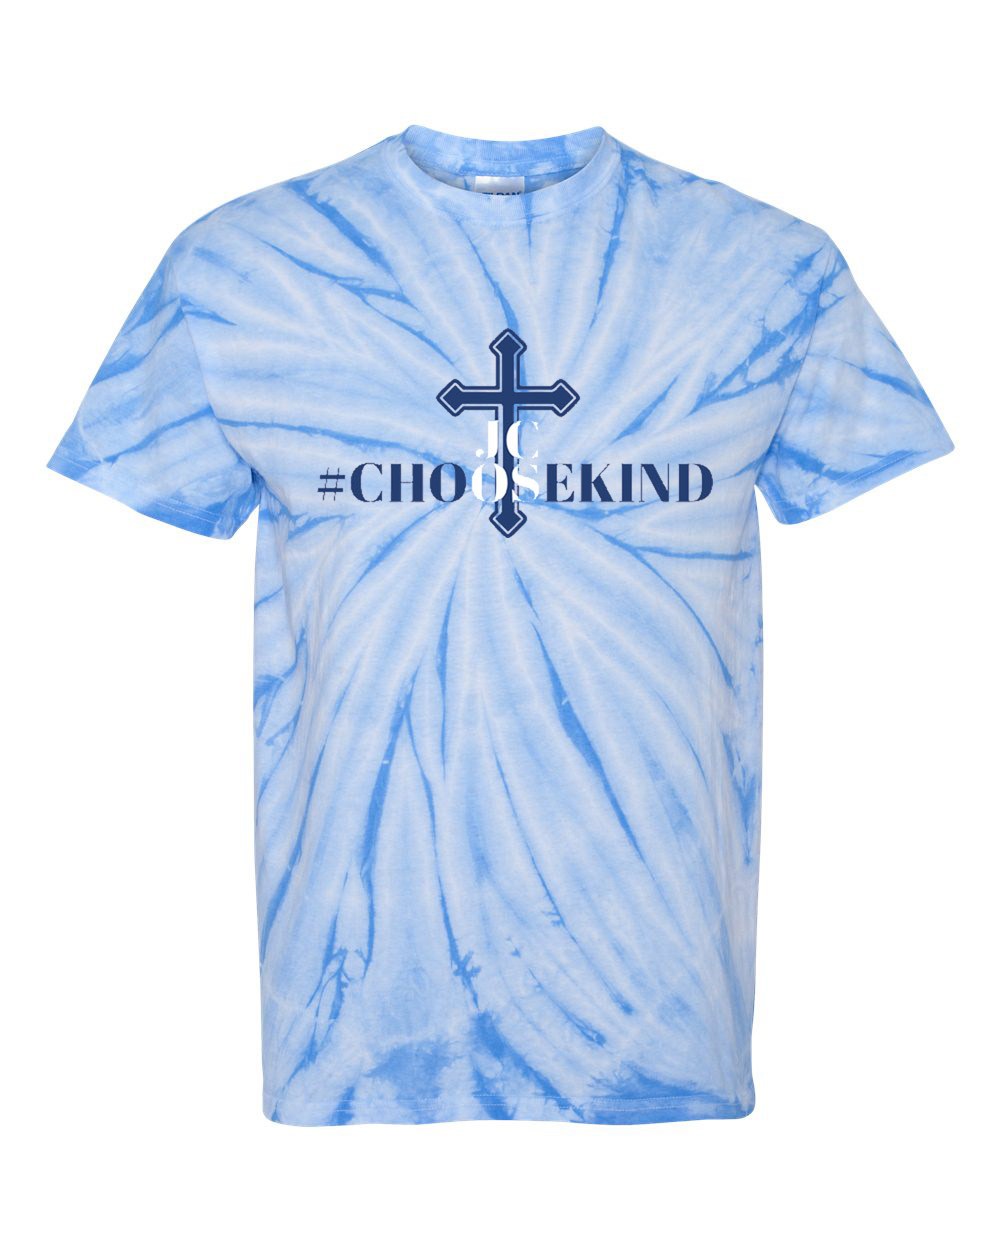 JCOS Spirit S/S Tie Dye T-Shirt w/ Choose Kindness Logo - Please Allow 2-3 Weeks for Delivery